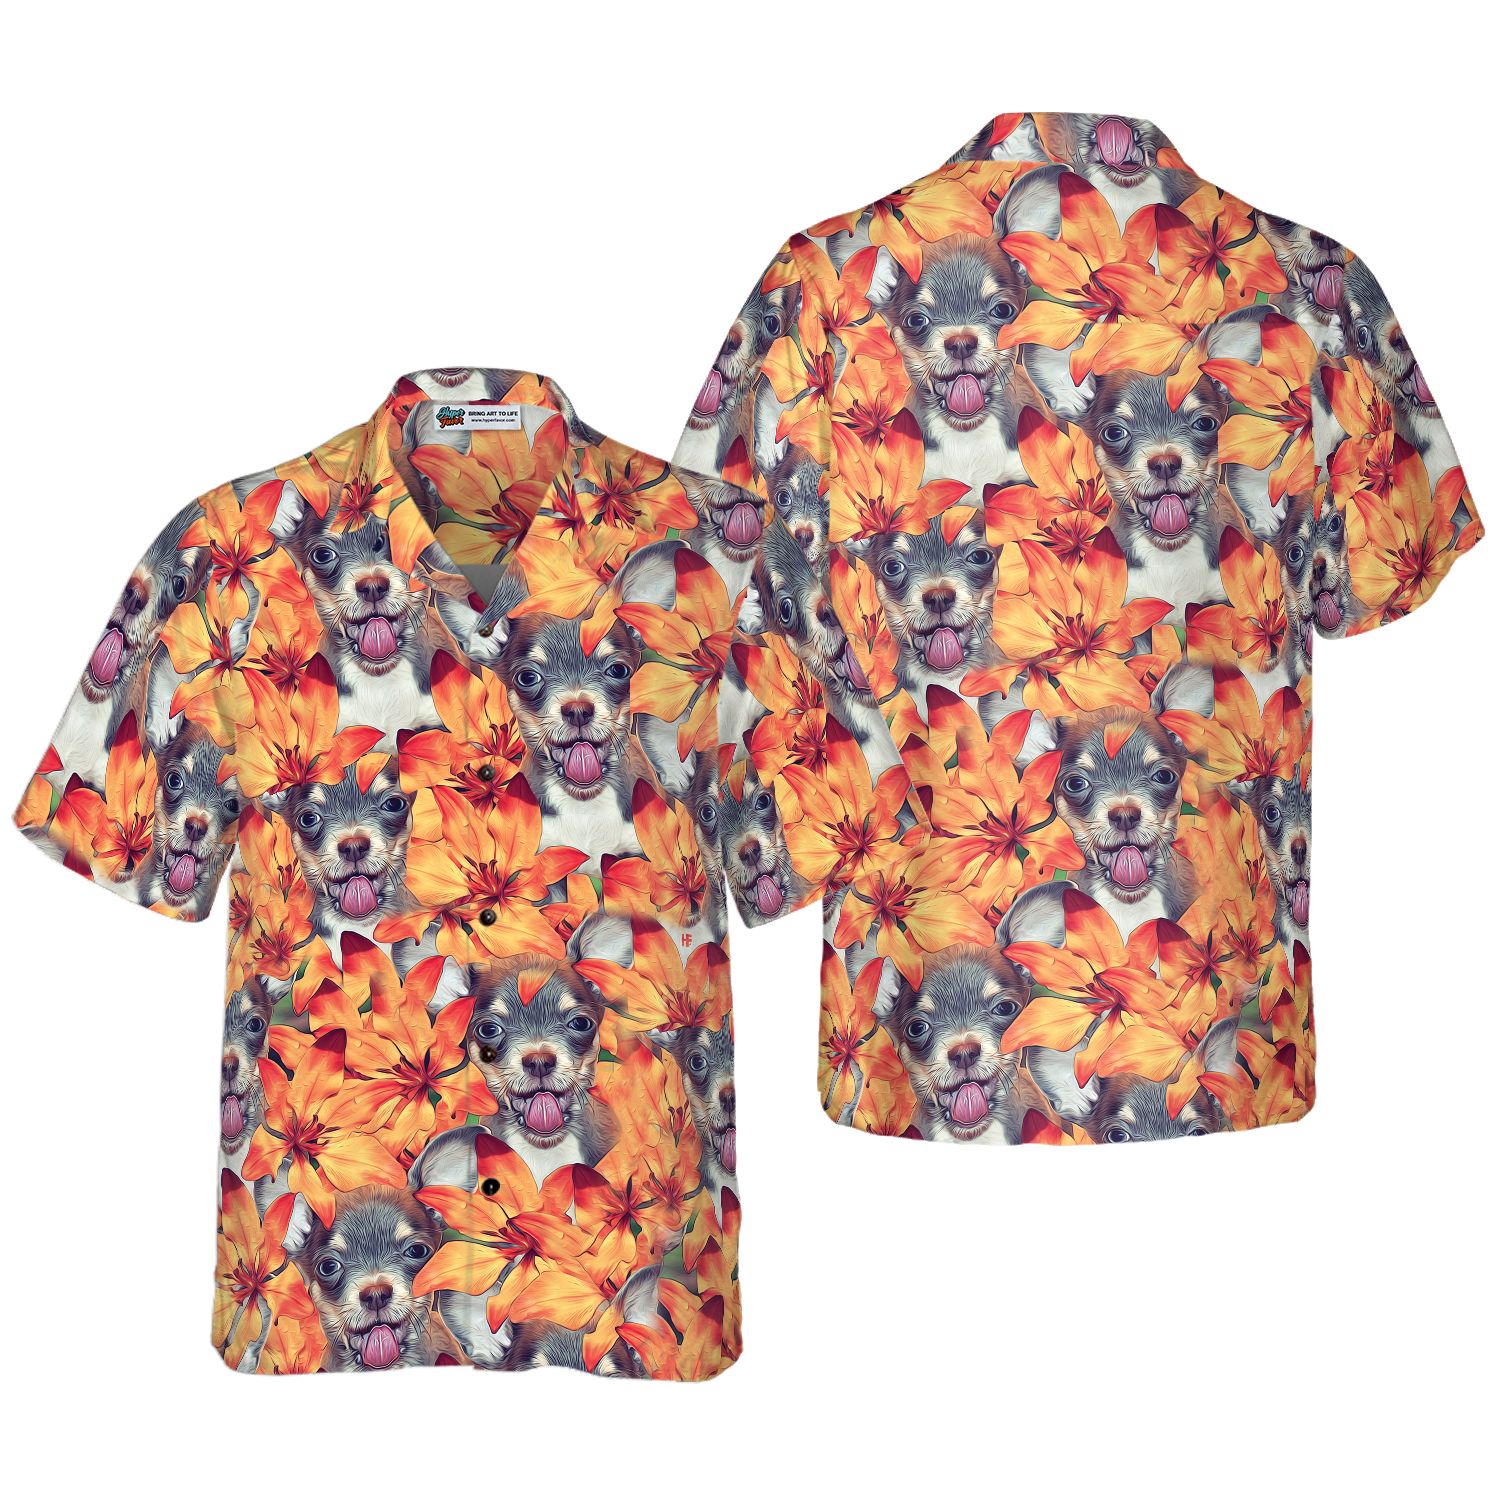 Chihuahua Puppies And Summer Flowers Hawaiian Shirt, Best Gift For Chihuahua Lover, Husband, Wife, Boyfriend, Girlfriend, Friend, Family